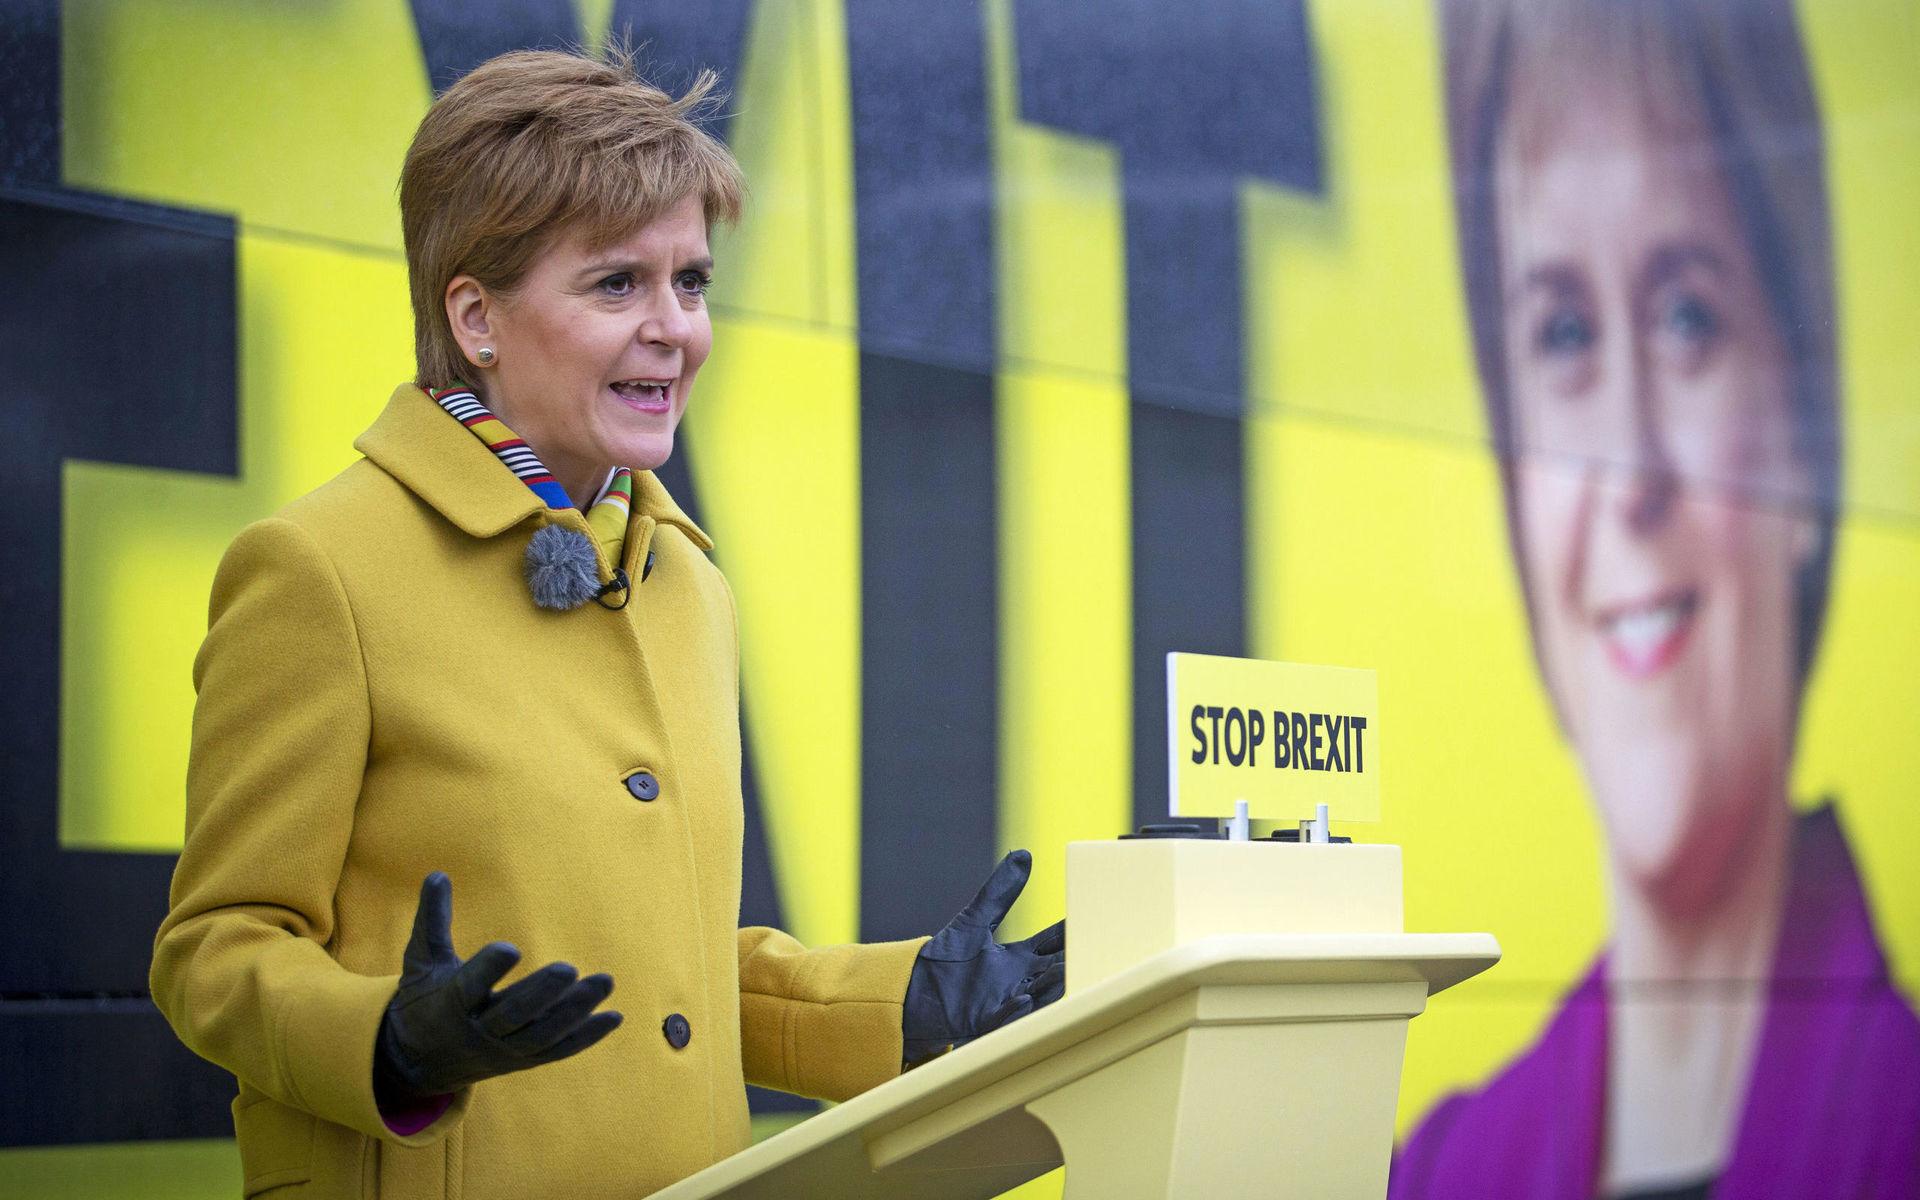 Scottish National Party (SNP) leader Nicola Sturgeon launches the party&apos;s election campaign bus, featuring a portrait of herself, at Port Edgar Marina in the town of South Queensferry, Scotland, before setting off on a tour of Scotland for the final week of the SNP&apos;s General Election campaign, Thursday Dec. 5, 2019.  Britain&apos;s Brexit is one of the main issues for all political parties and for voters, as the UK goes to the polls in a General Election on Dec. 12. (Jane Barlow/PA via AP)  LRC817